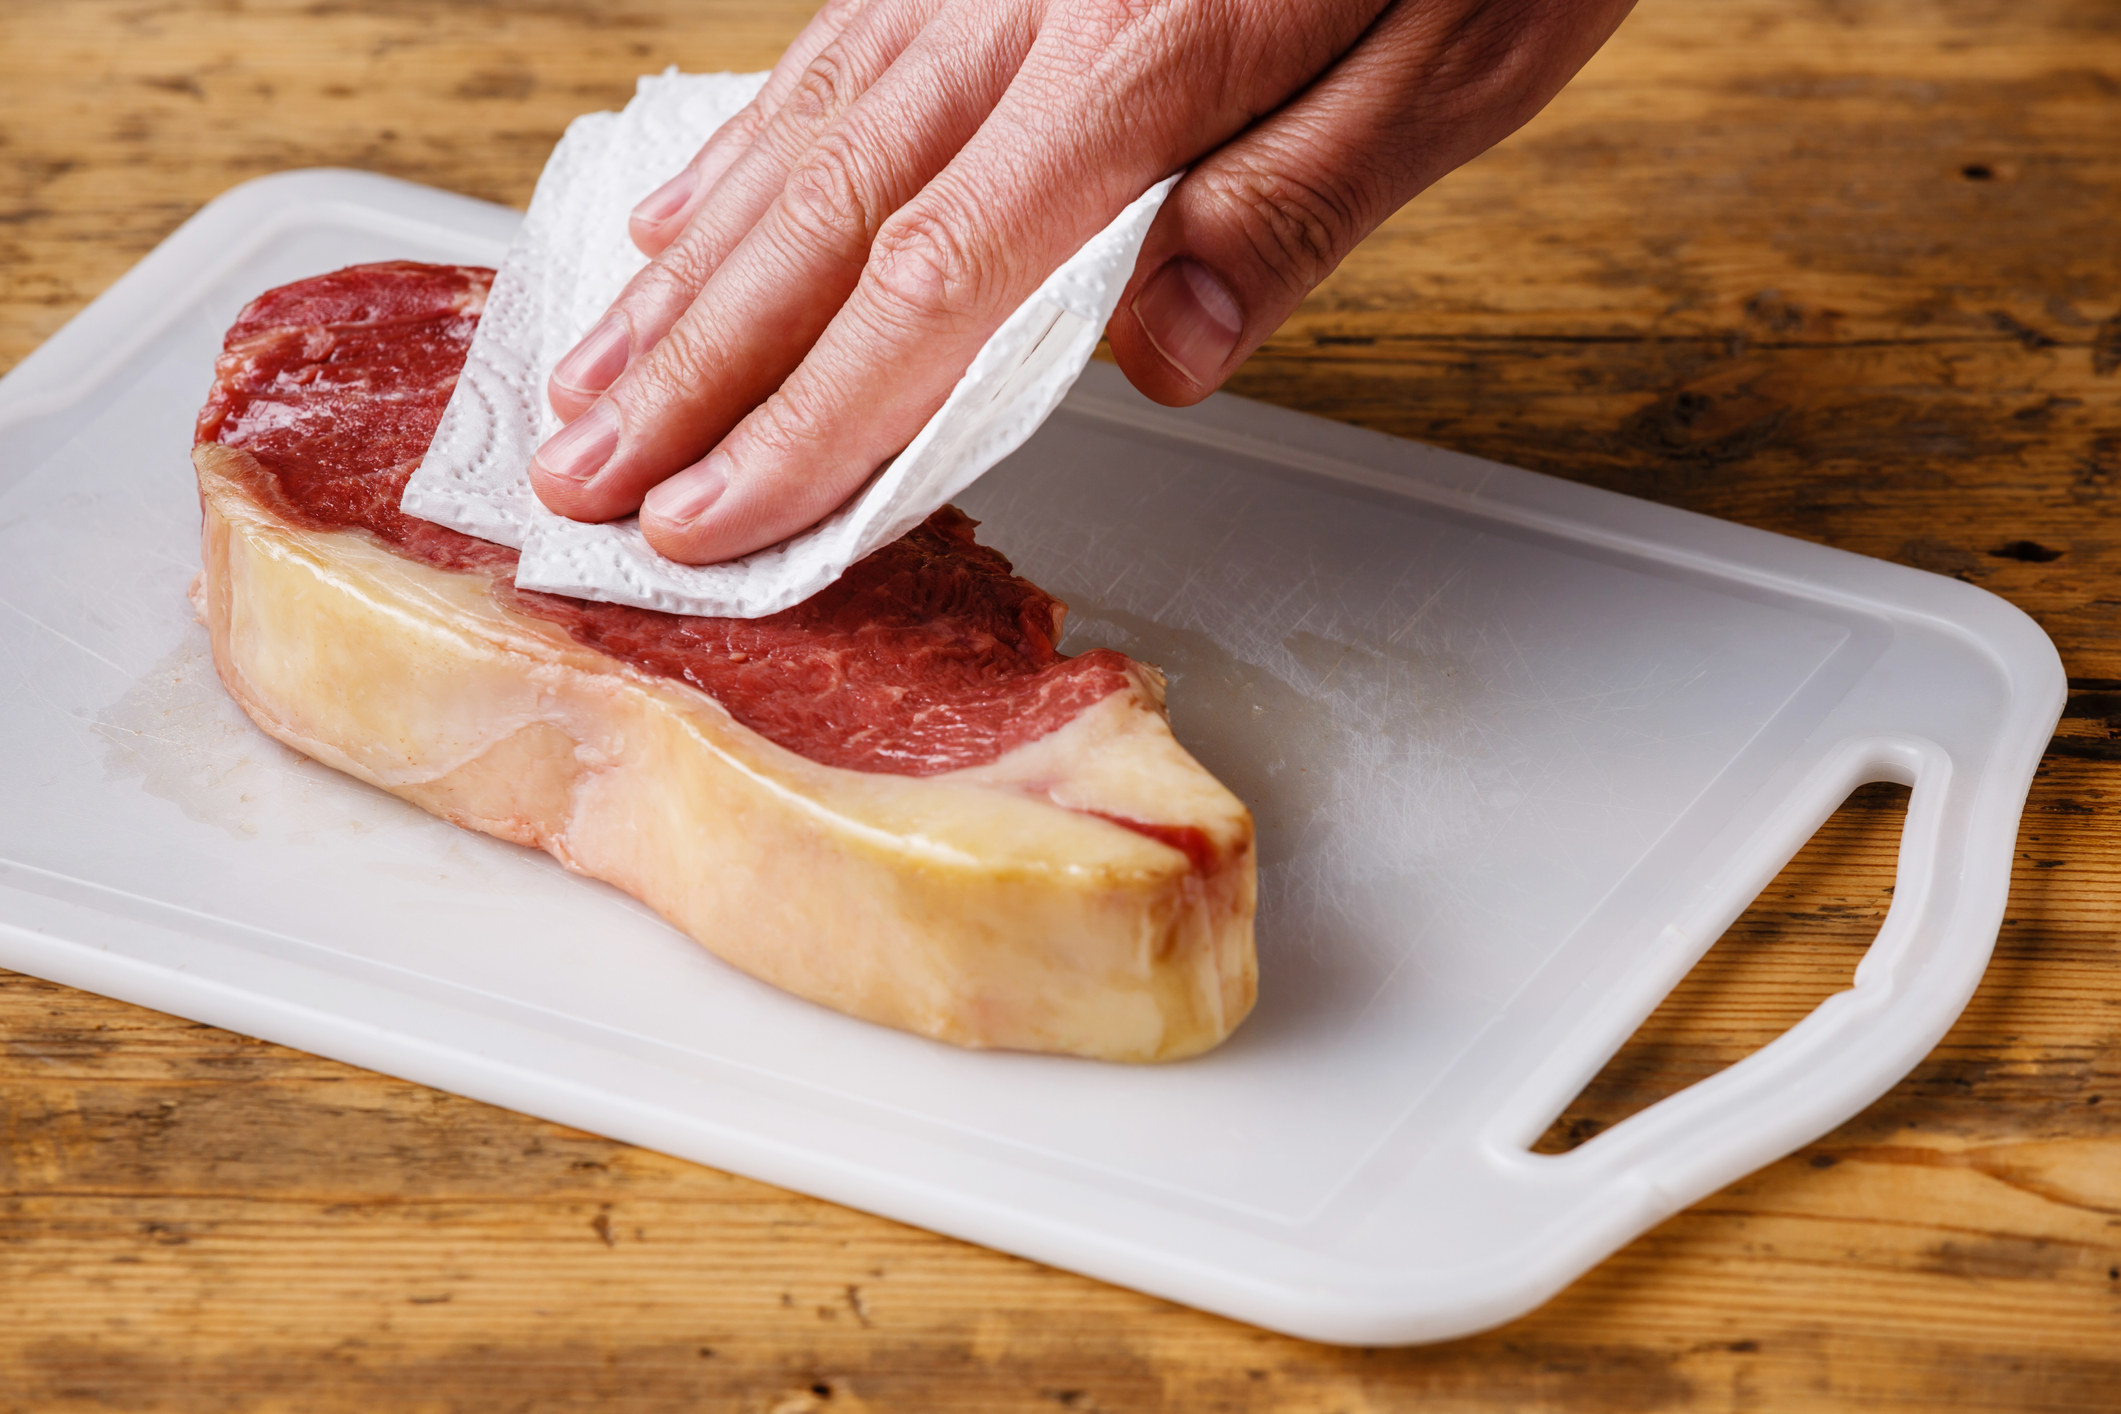 Patting a steak dry with paper towel.